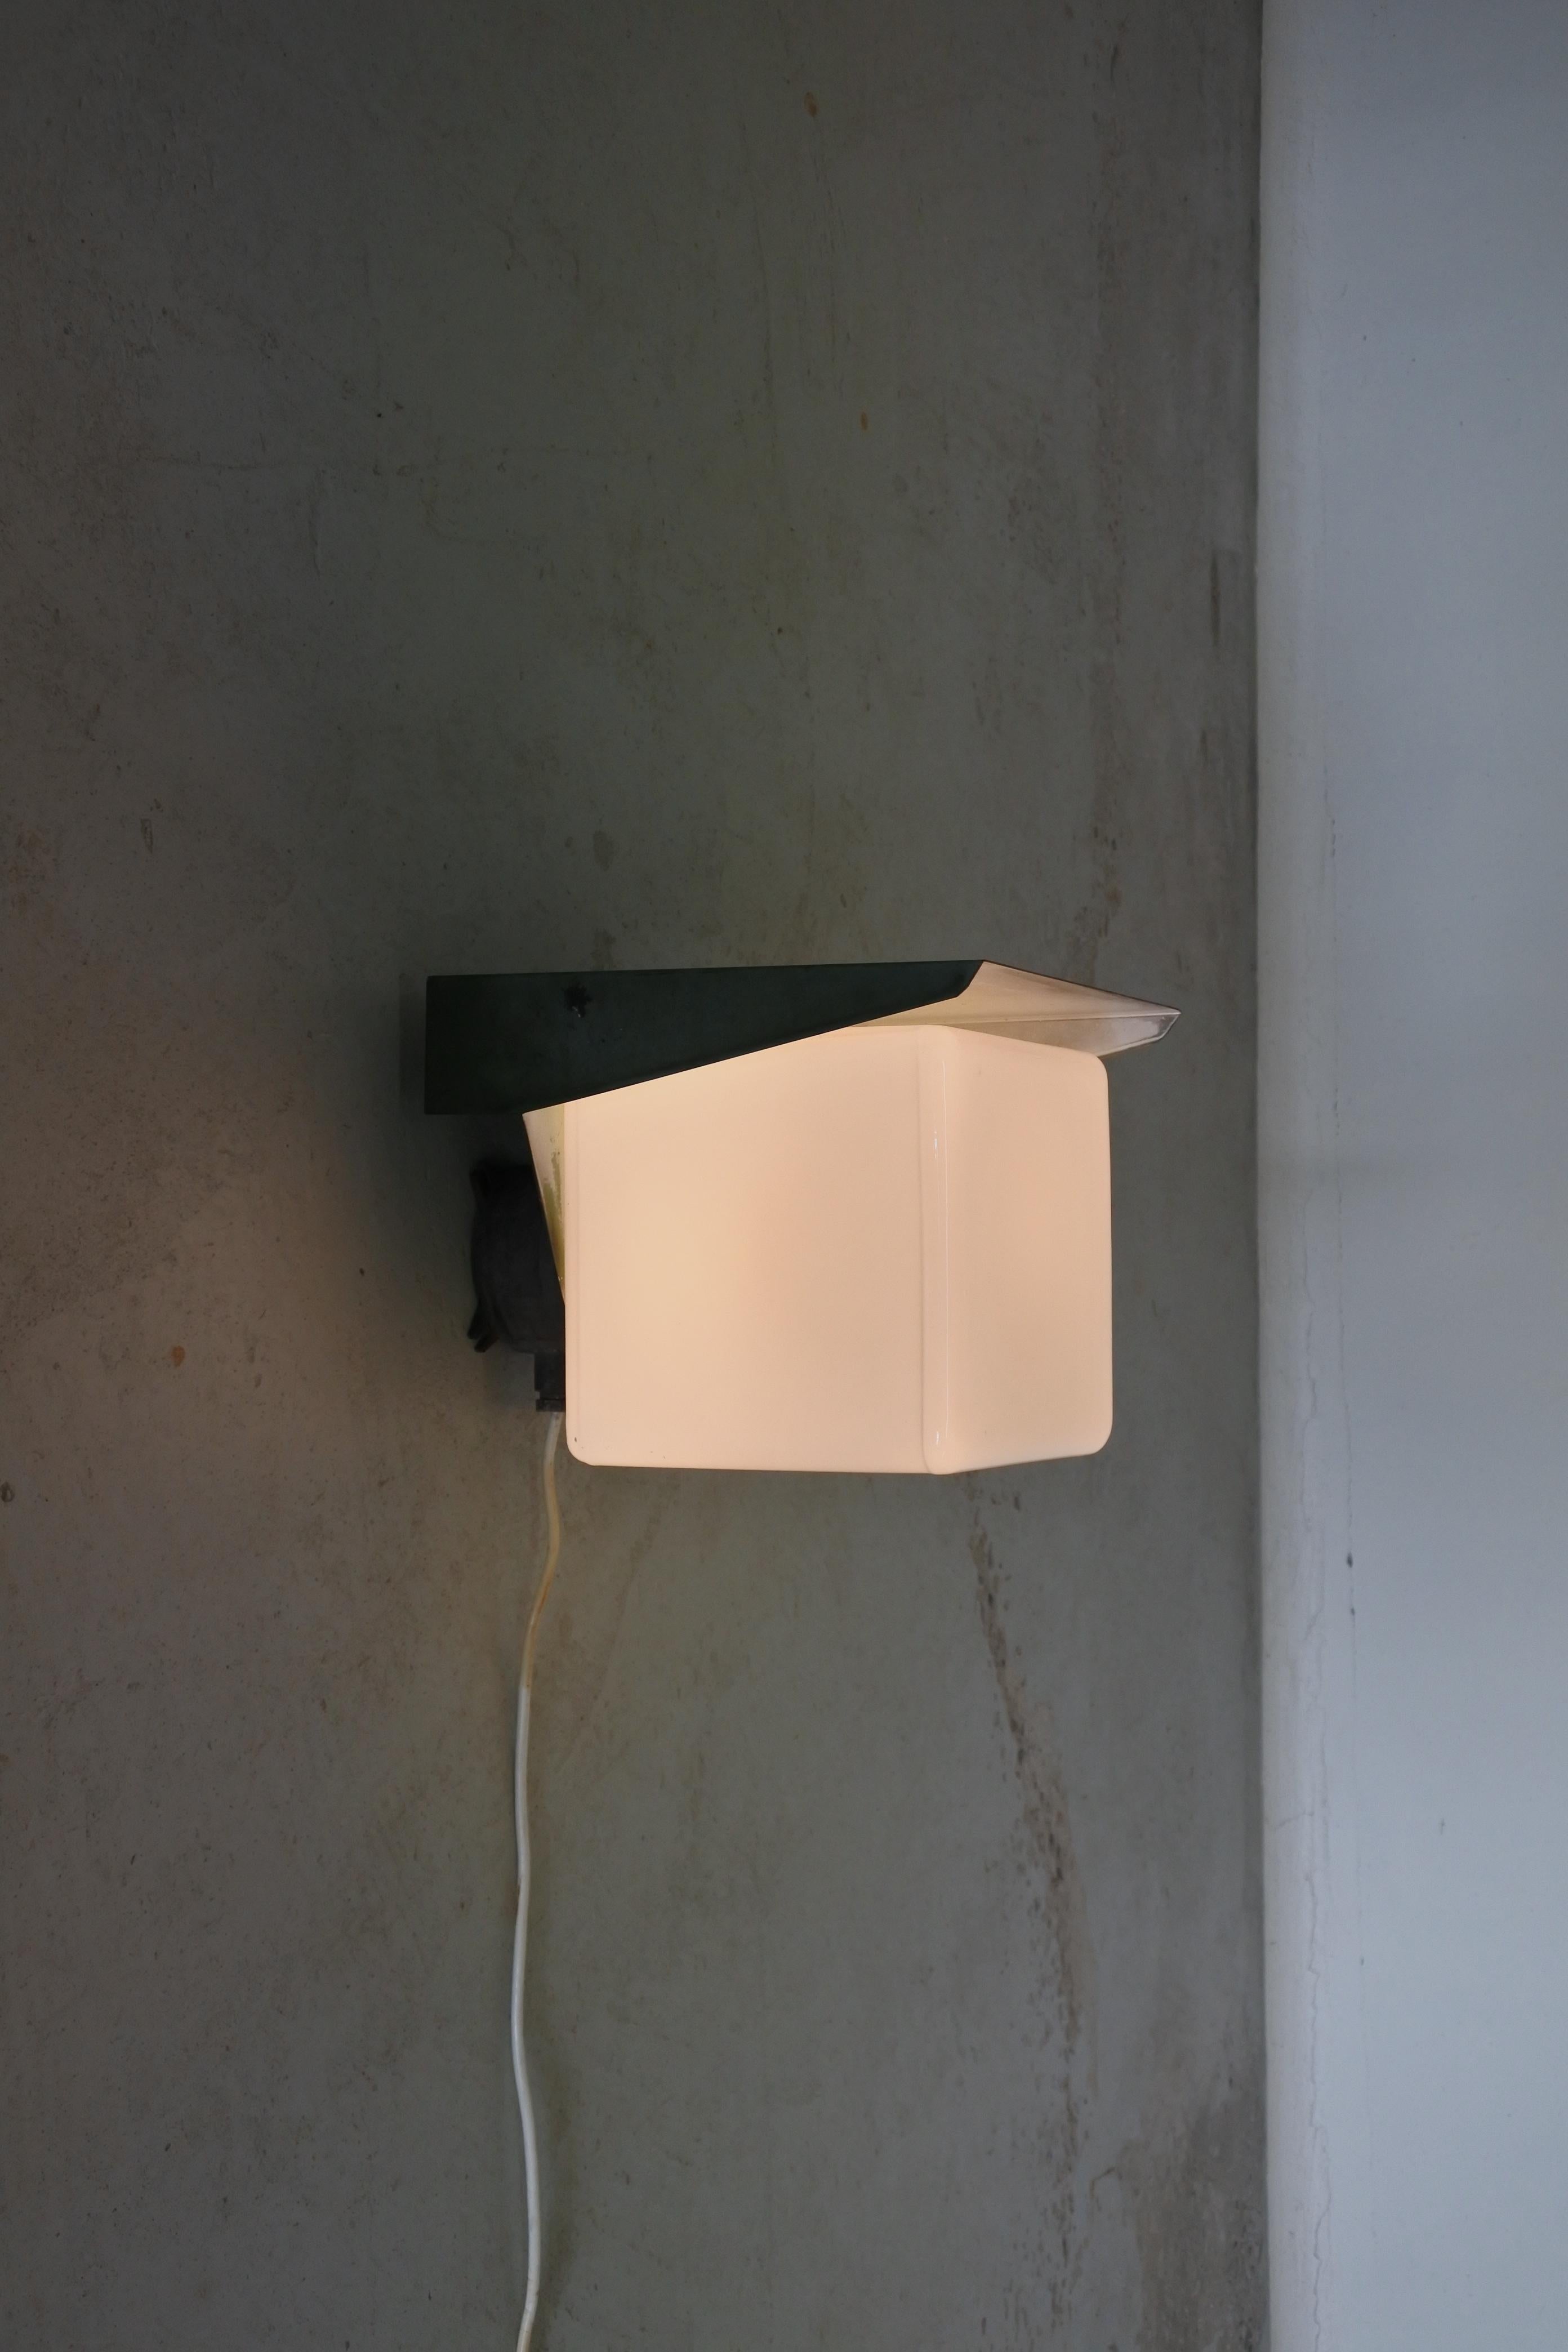 Wall lamp made by Itsu Oy, model AT21
Finland 1950s.
Copper reflector and opaline glass mounted on an aluminium junction box.
Marked accordingly.

Outstanding patina. Scarce model. Ideal as a porch light.

Literature: Itsu catalogues of the